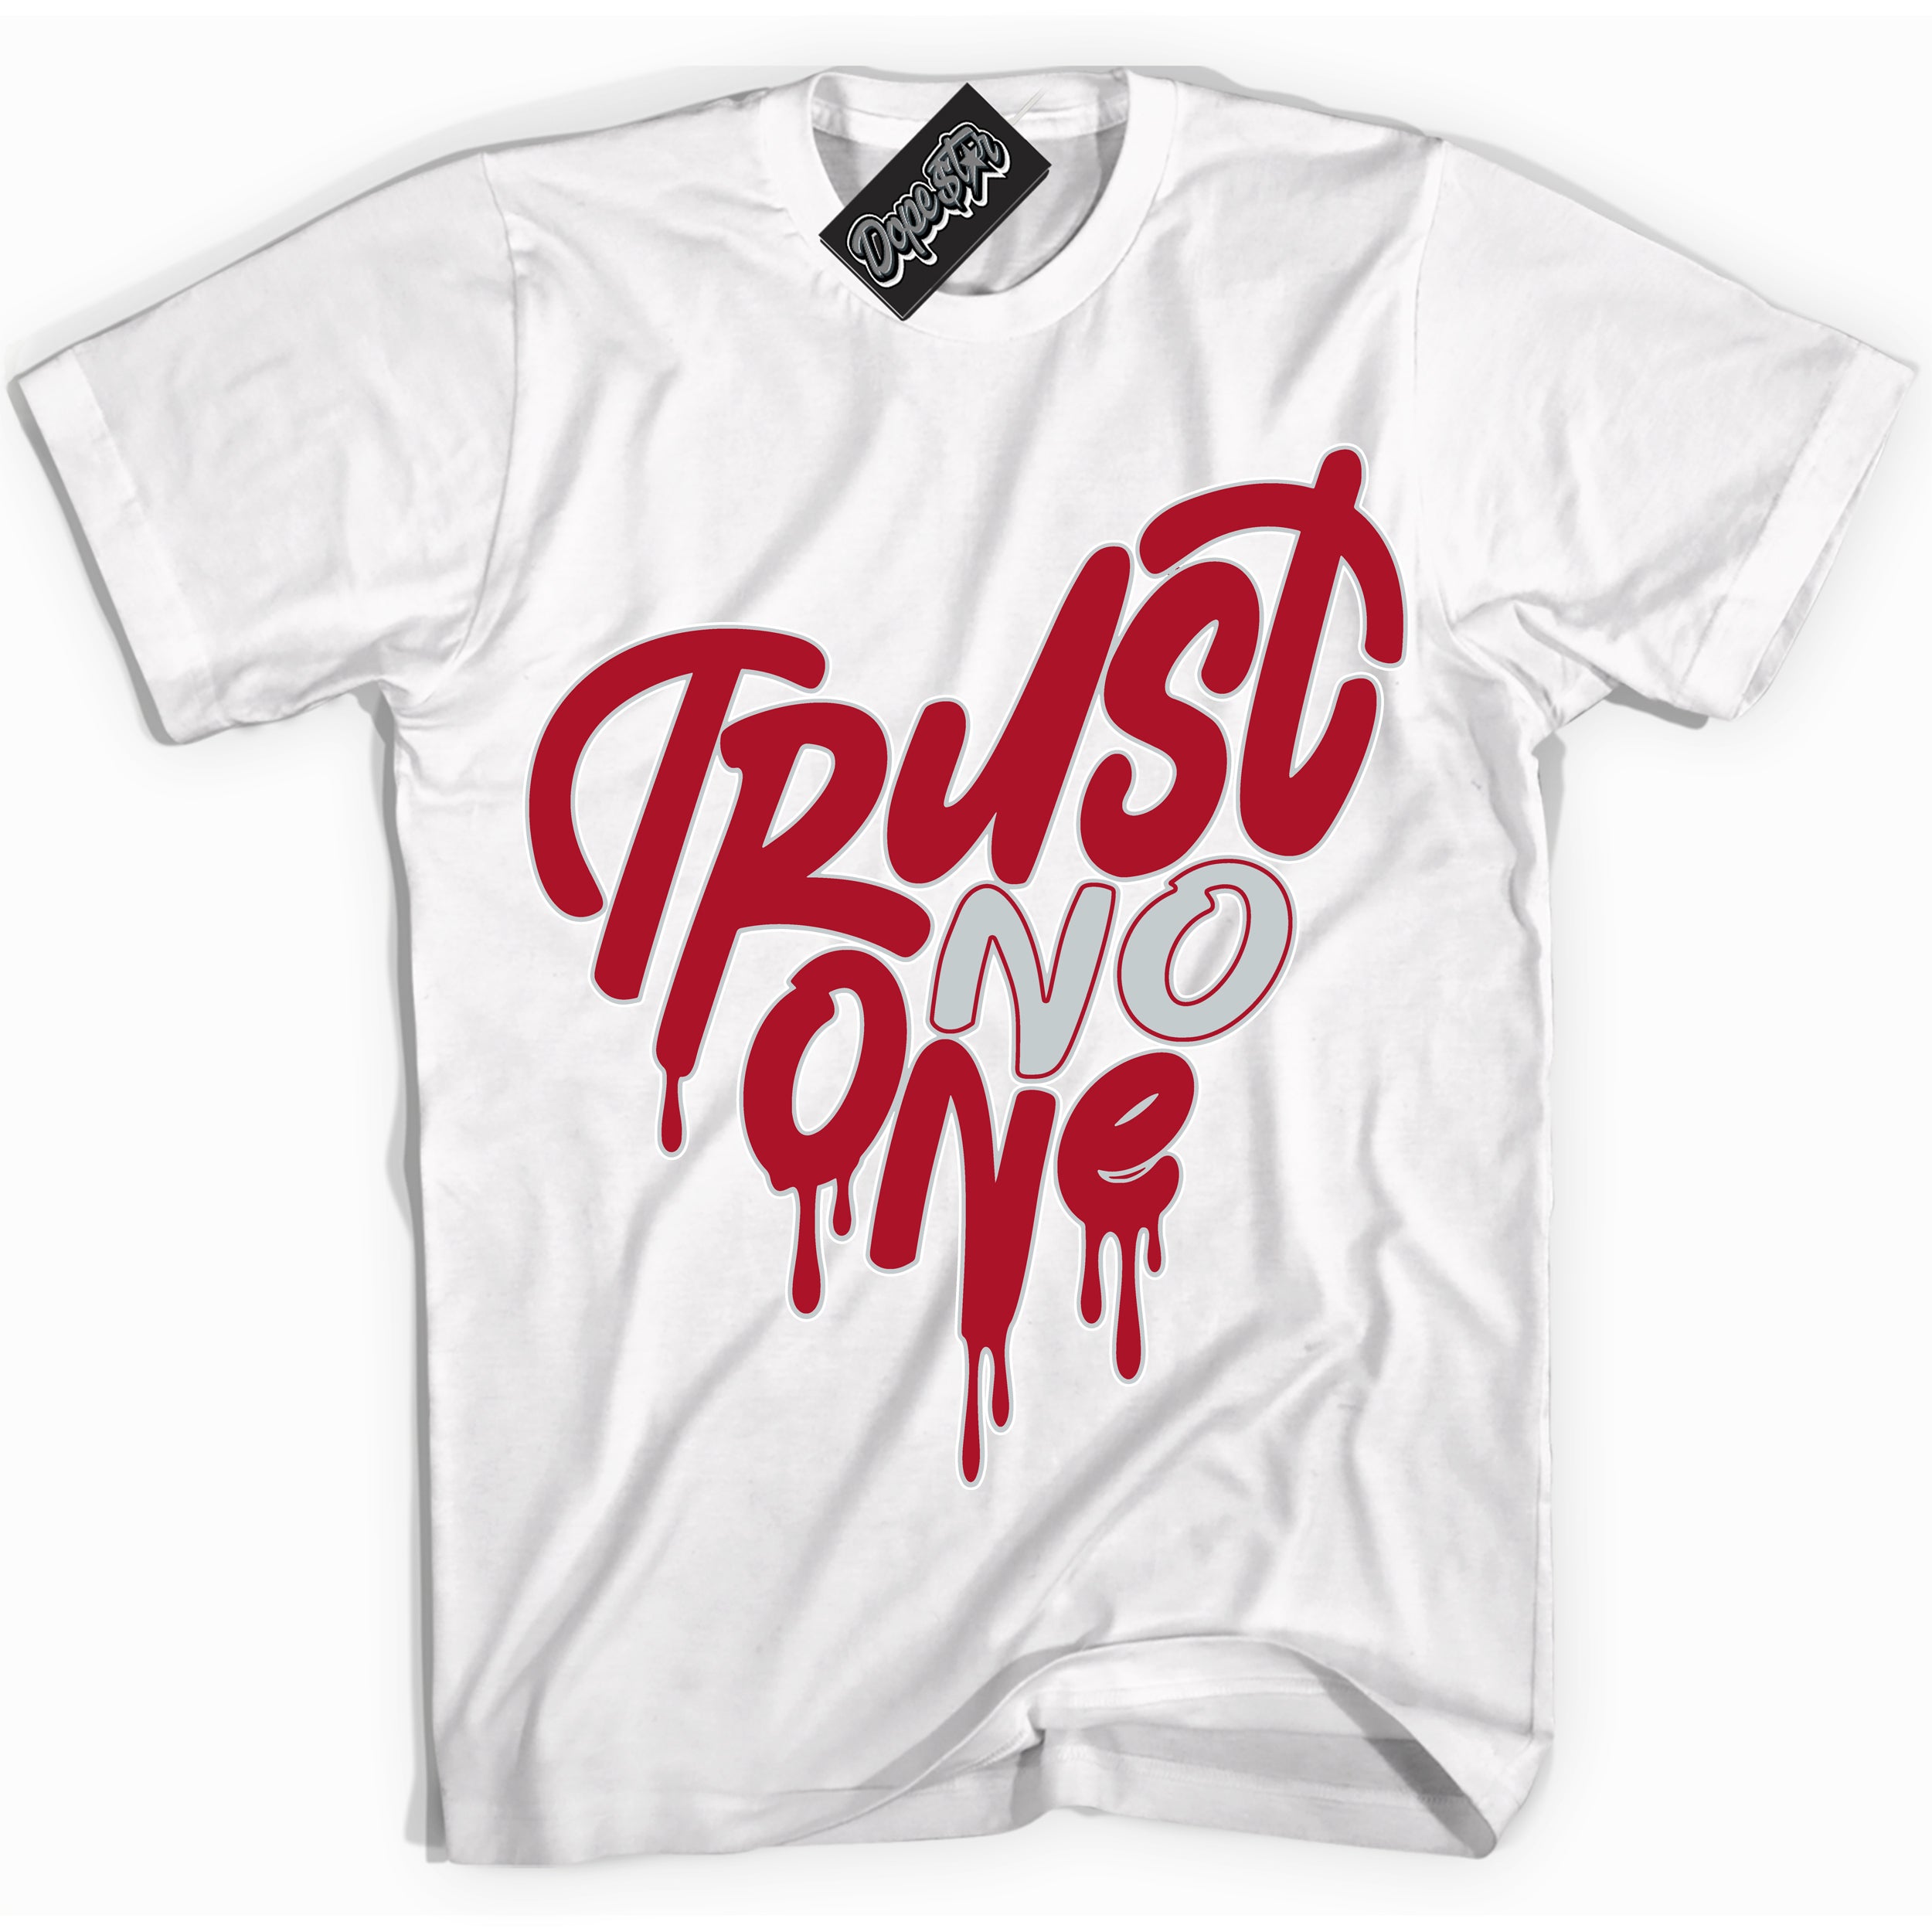 Cool White Shirt with “ Trust No One Heart” design that perfectly matches Reverse Ultraman Sneakers.